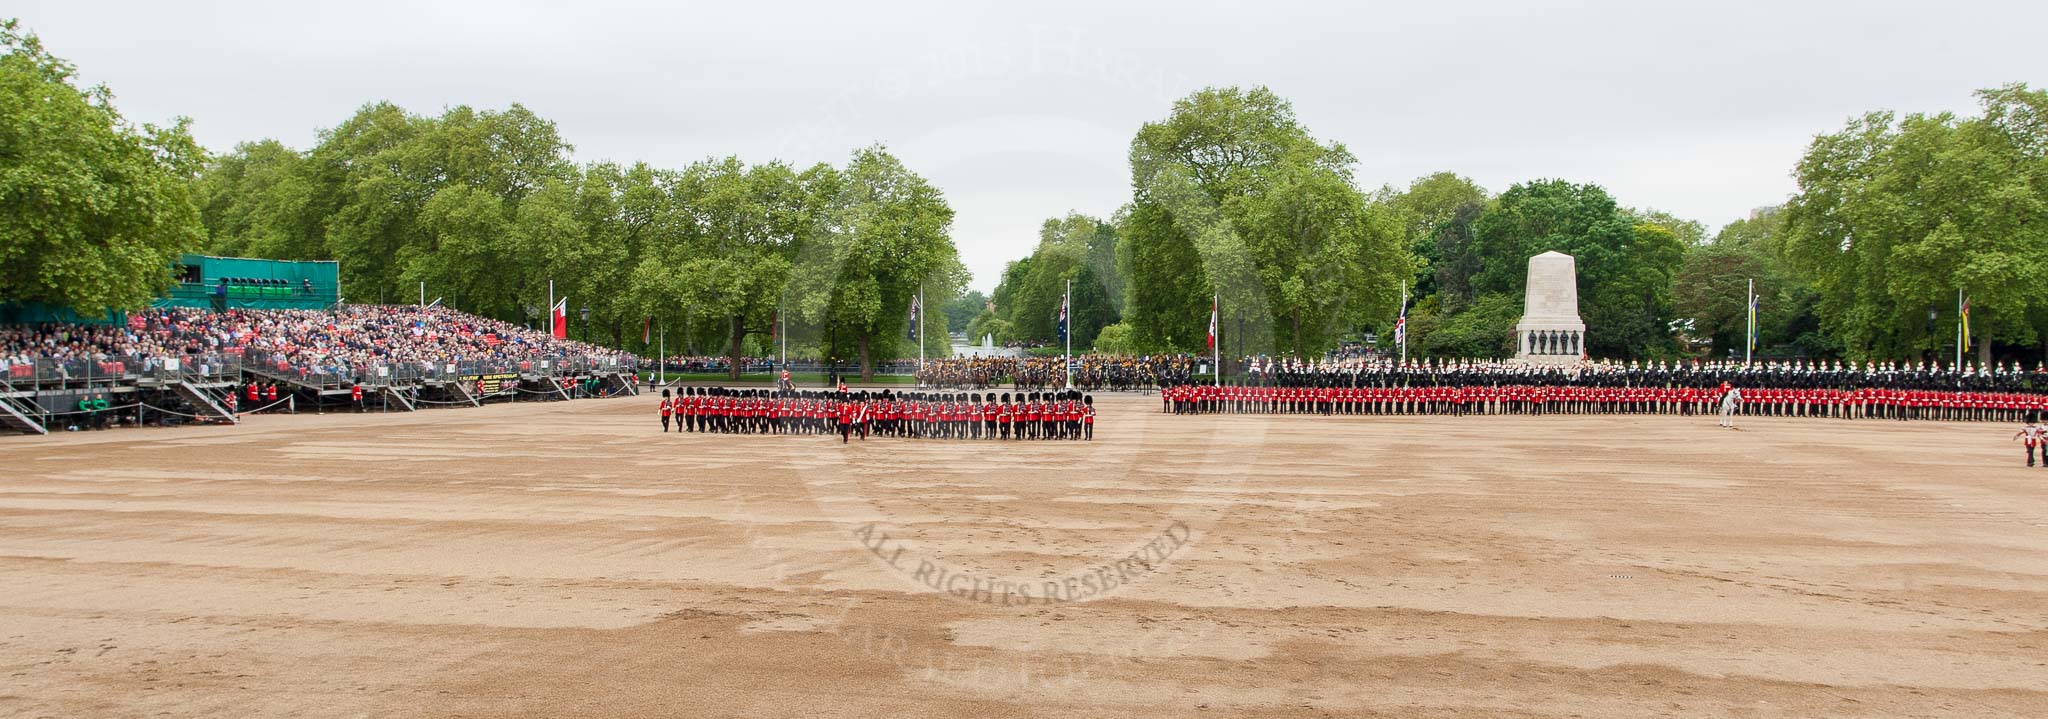 Major General's Review 2013: A wide angle overview of Horse Guards Parade. on the left, No. 1 Guard (Escort for the Colour),1st Battalion Welsh Guards is moving forward to receive the Colour..
Horse Guards Parade, Westminster,
London SW1,

United Kingdom,
on 01 June 2013 at 11:16, image #372